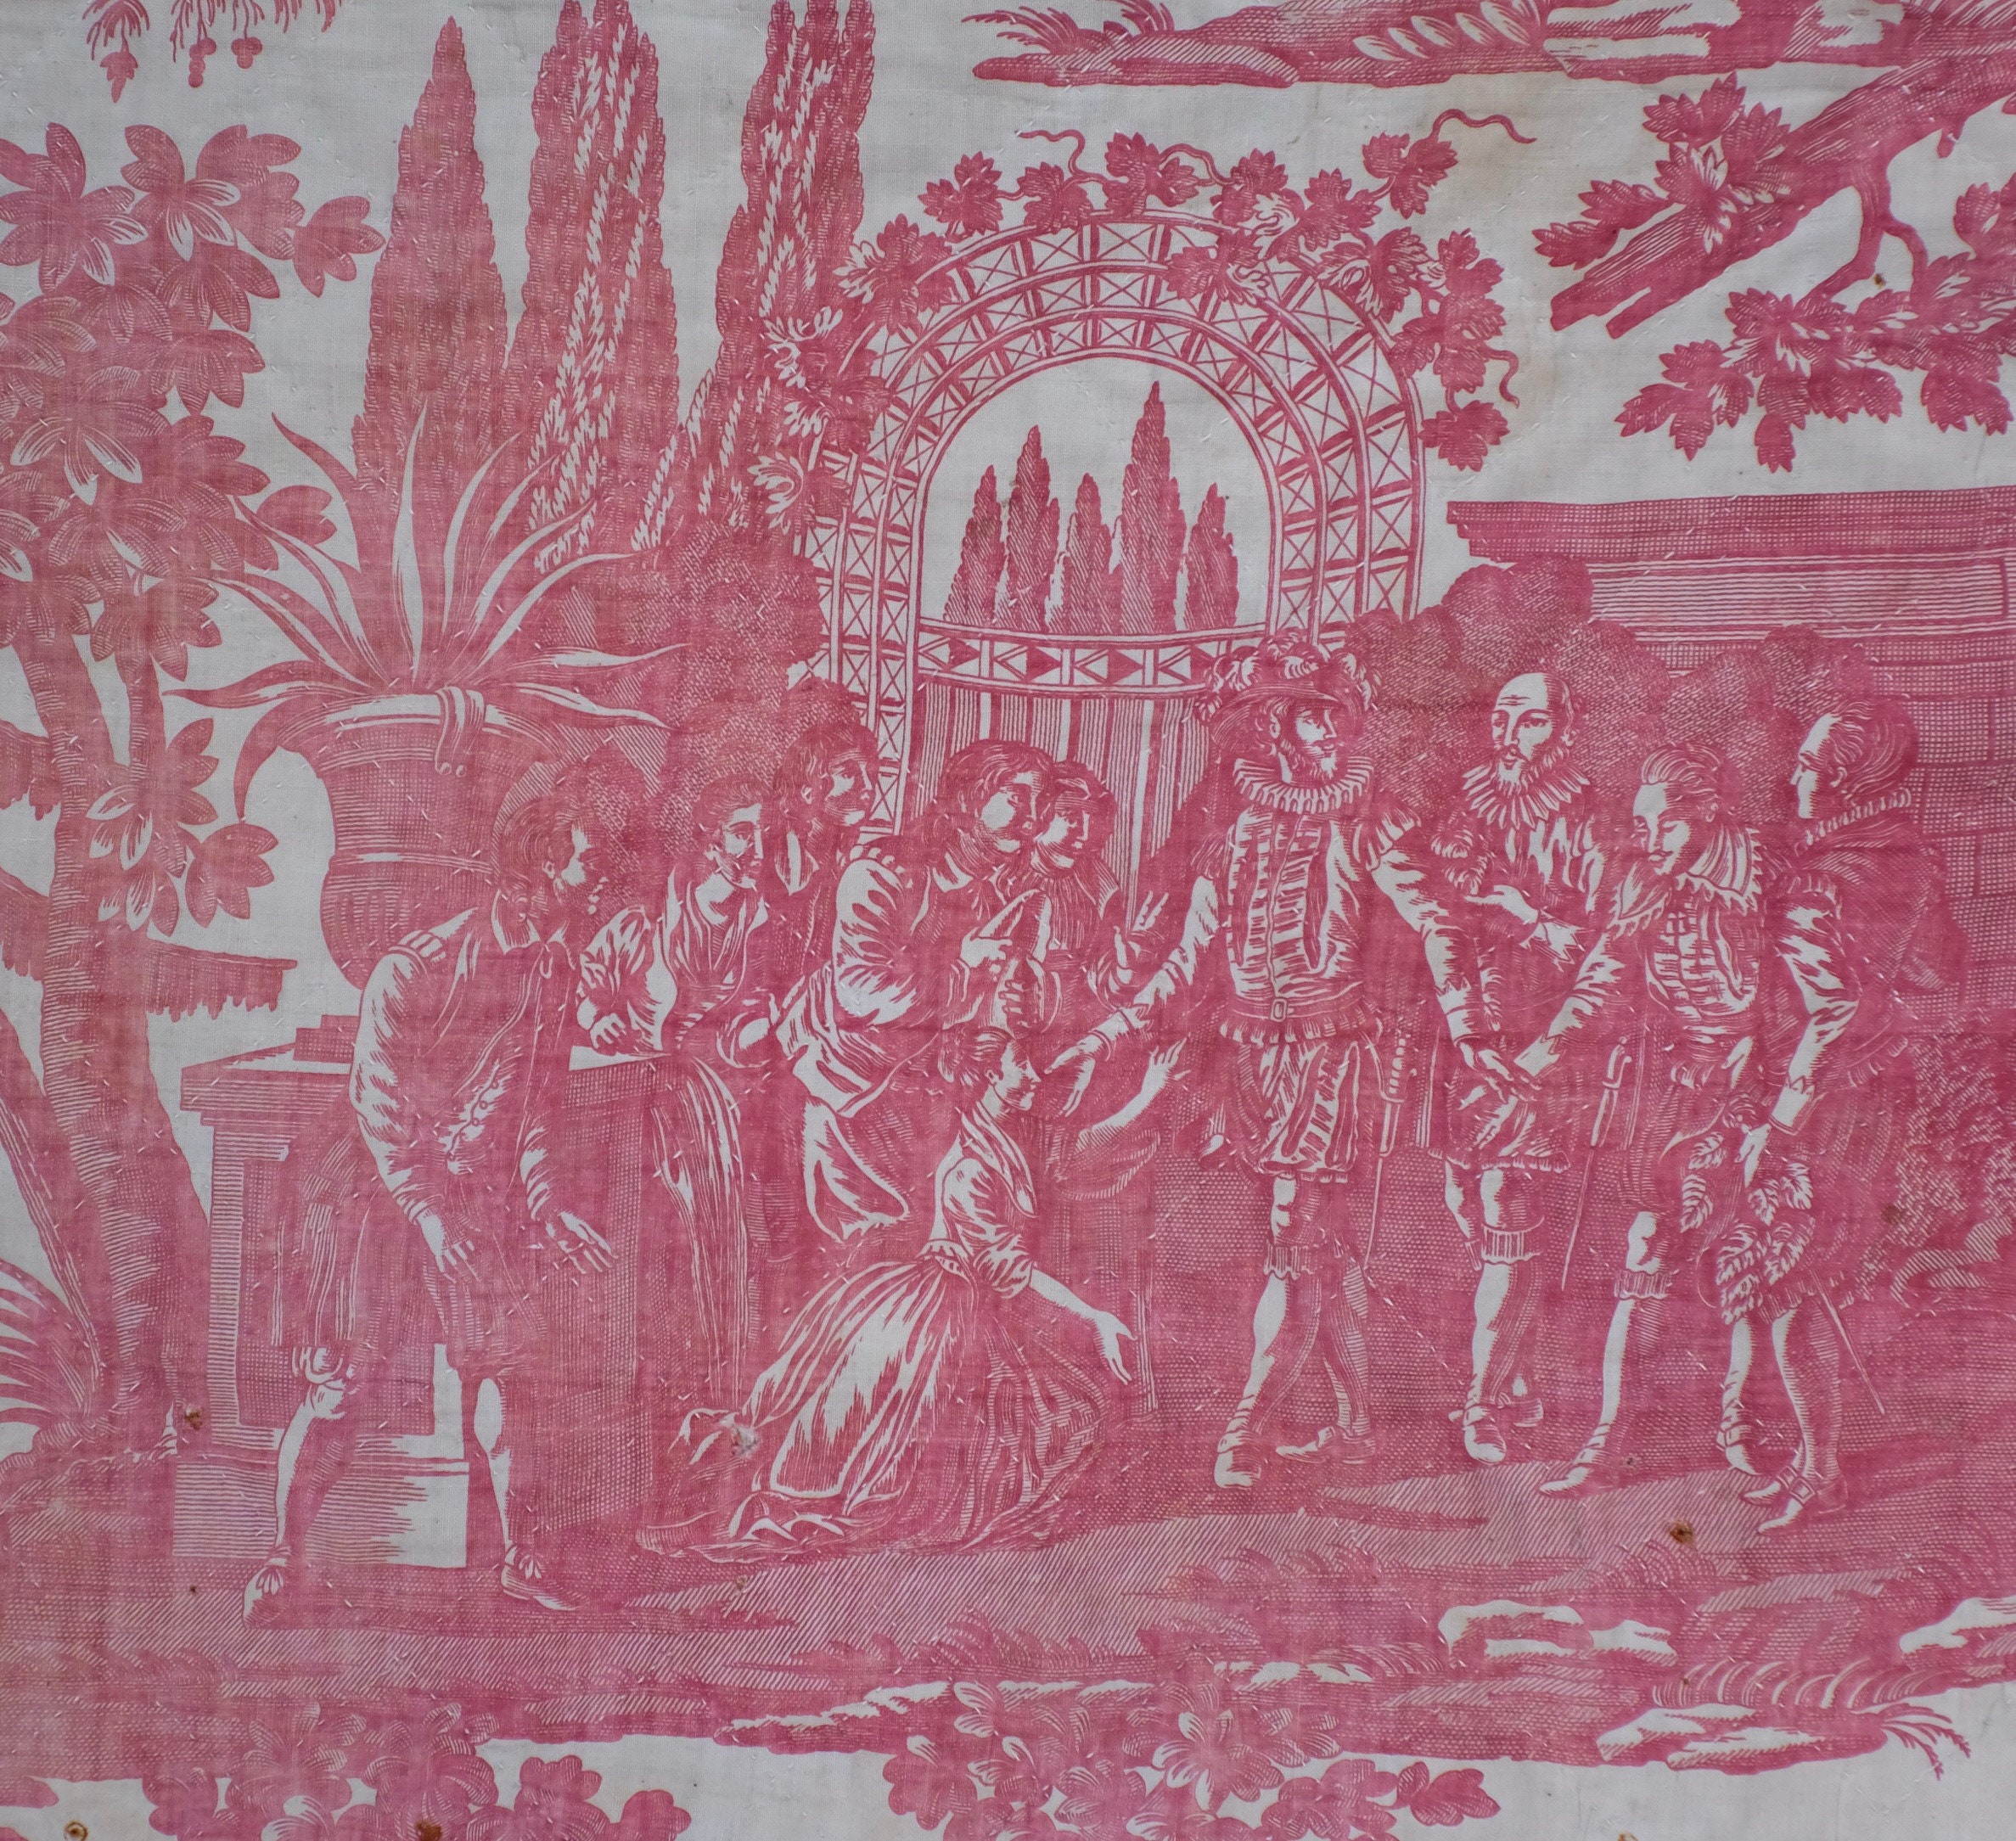 Living Coral Toile de Jouy Fabric, French Vintage Toile Art Nouveau Fabric  for Home Decor, Bench, Sofa, Chair Upholstery Fabric by The Yard